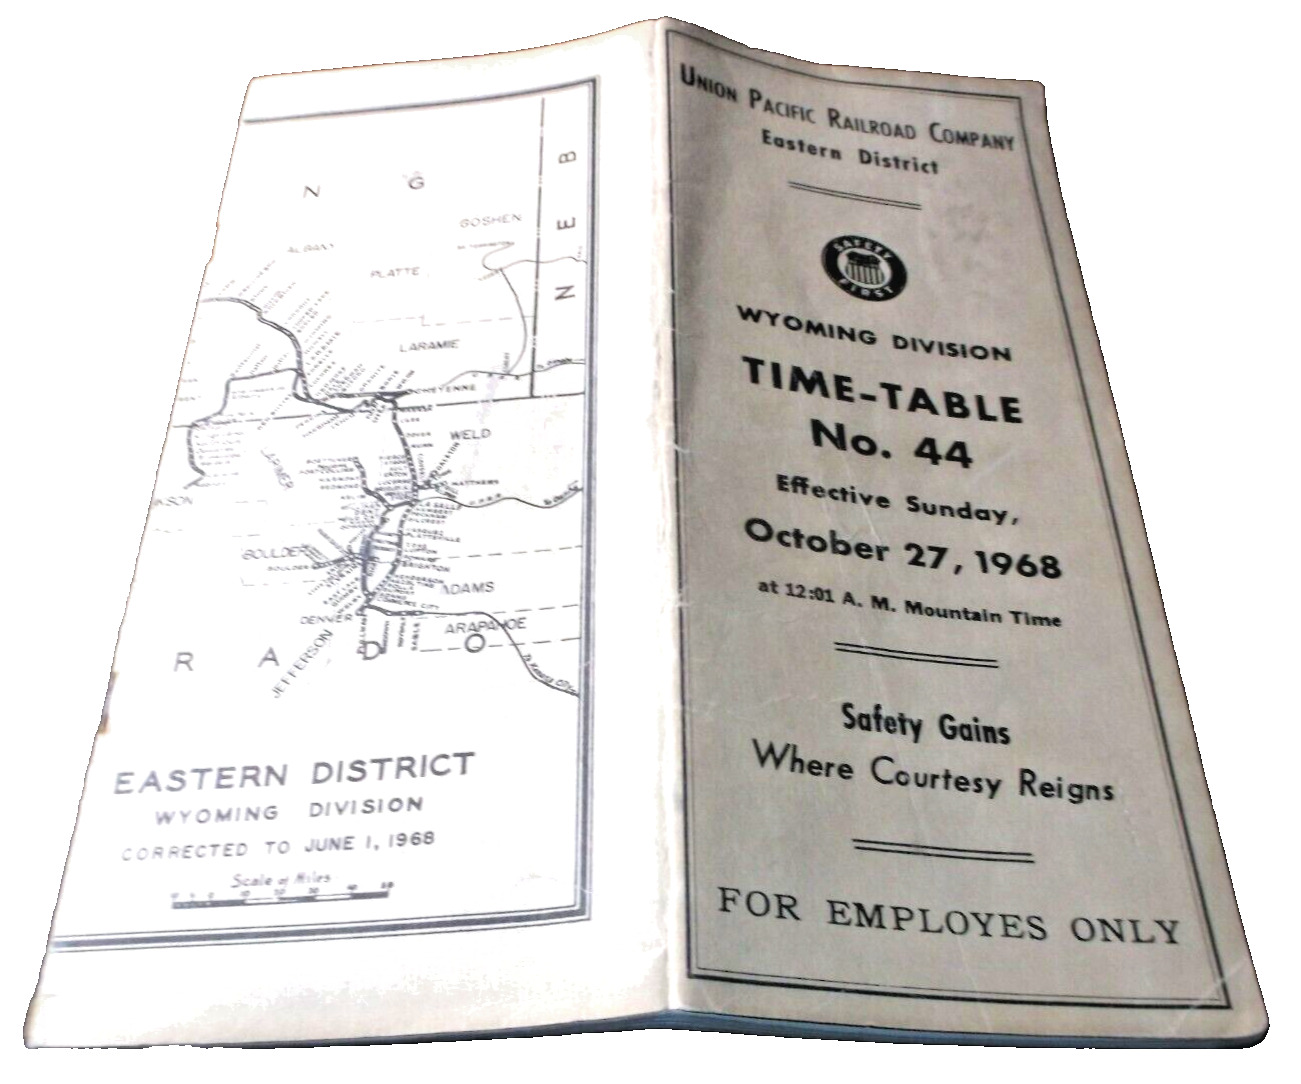 OCTOBER 1968 UNION PACIFIC WYOMING DIVISION EMPLOYEE TIMETABLE #44